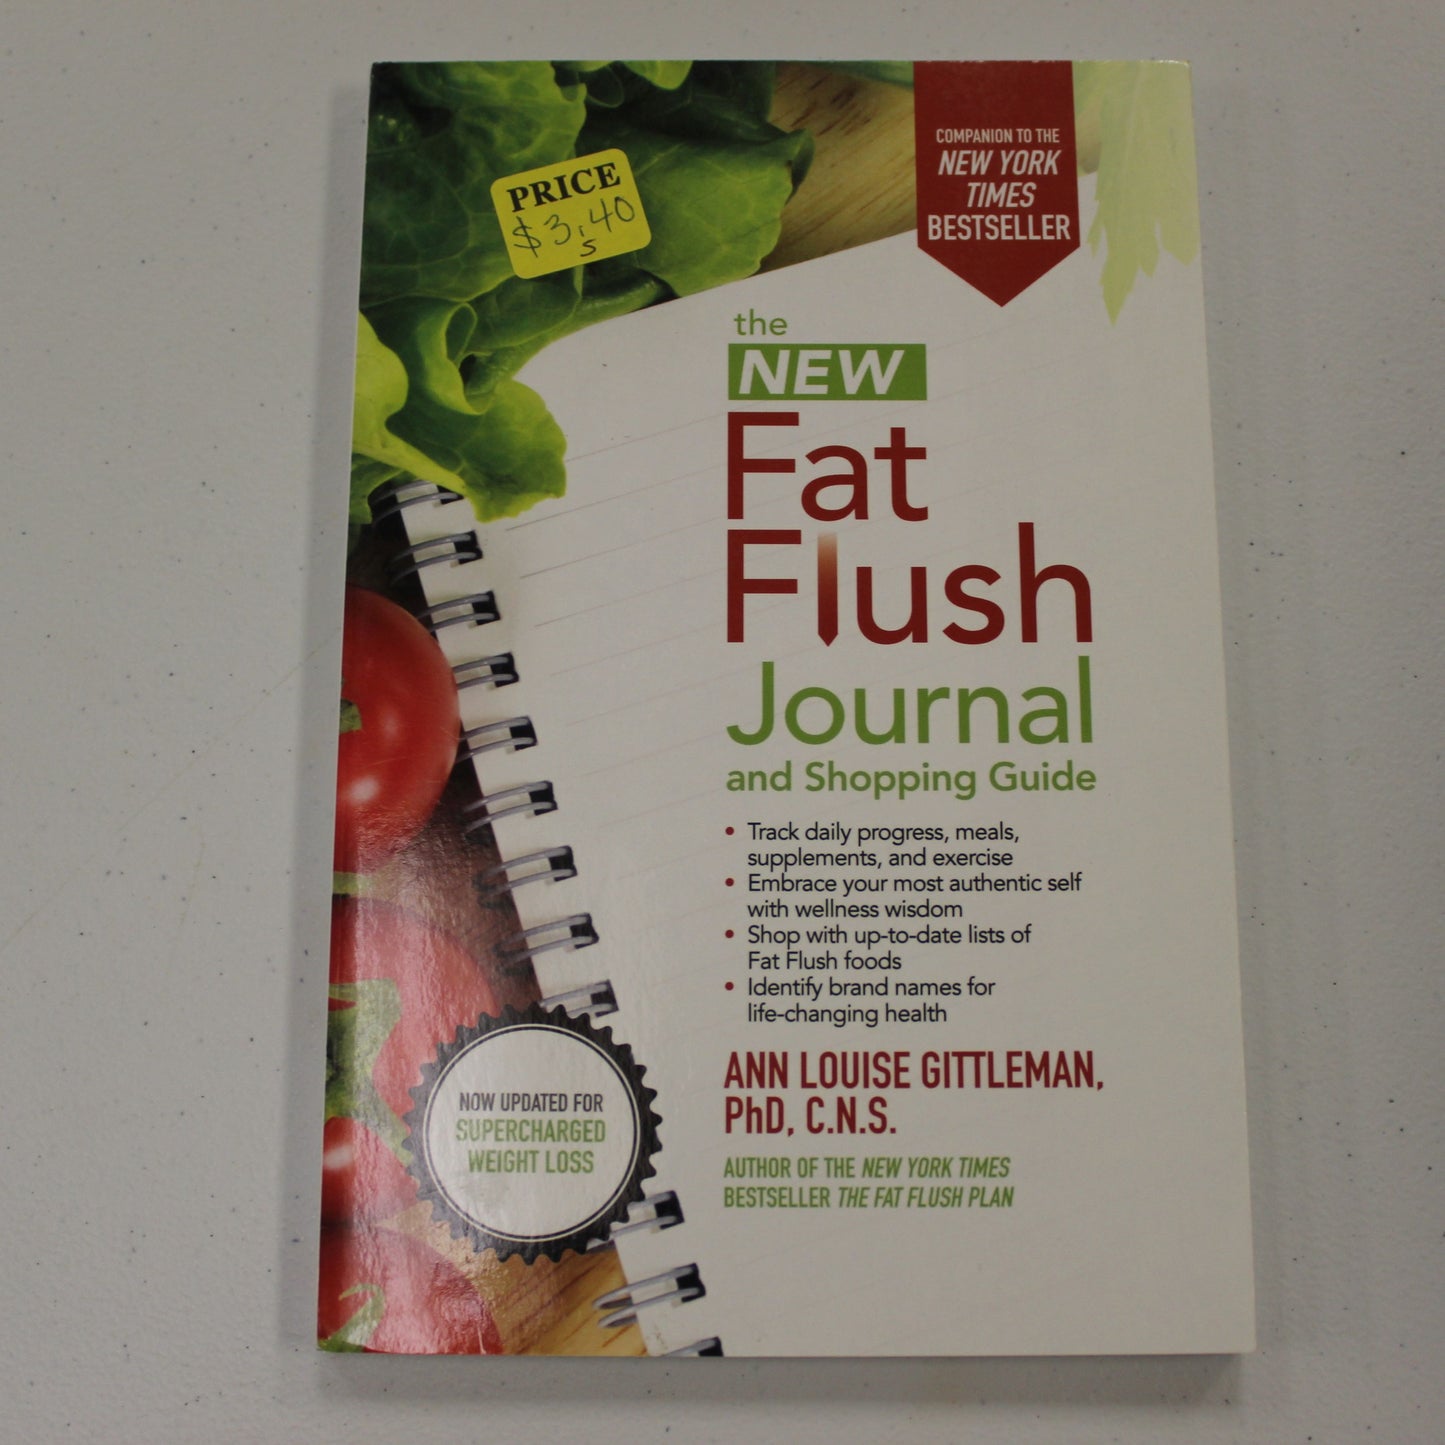 THE NEW FAT FLUSH JOURNAL AND SHOPPING GUIDE